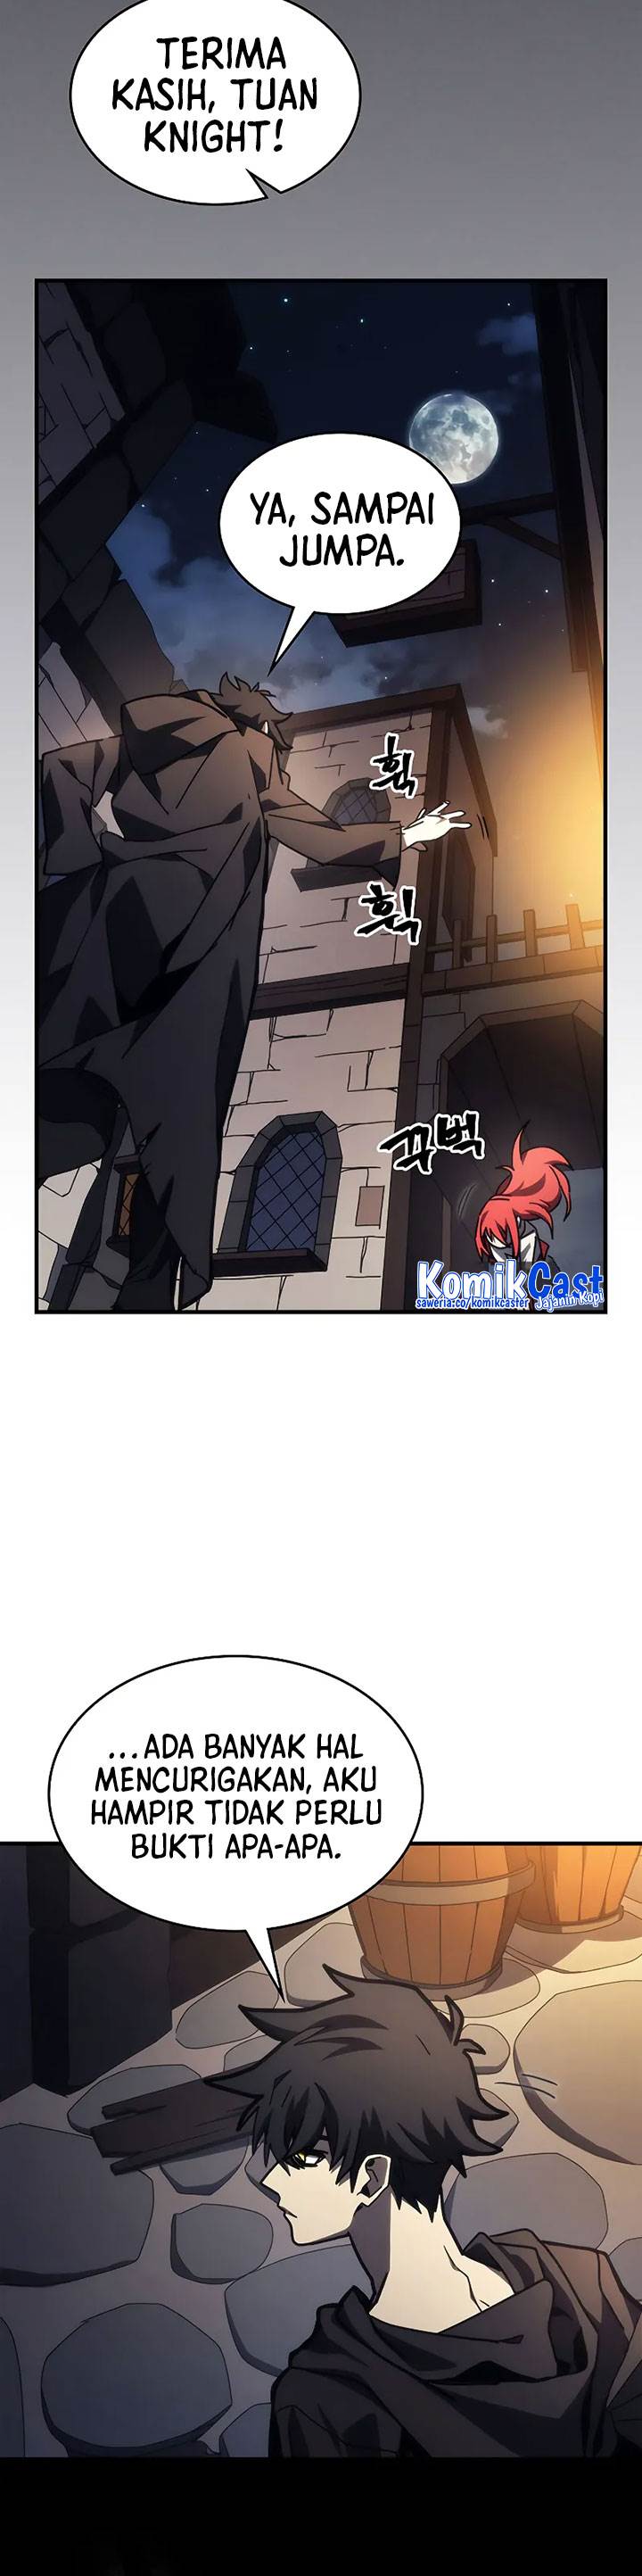 The Unbeatable Dungeon’s Lazy Boss Monster Chapter 28